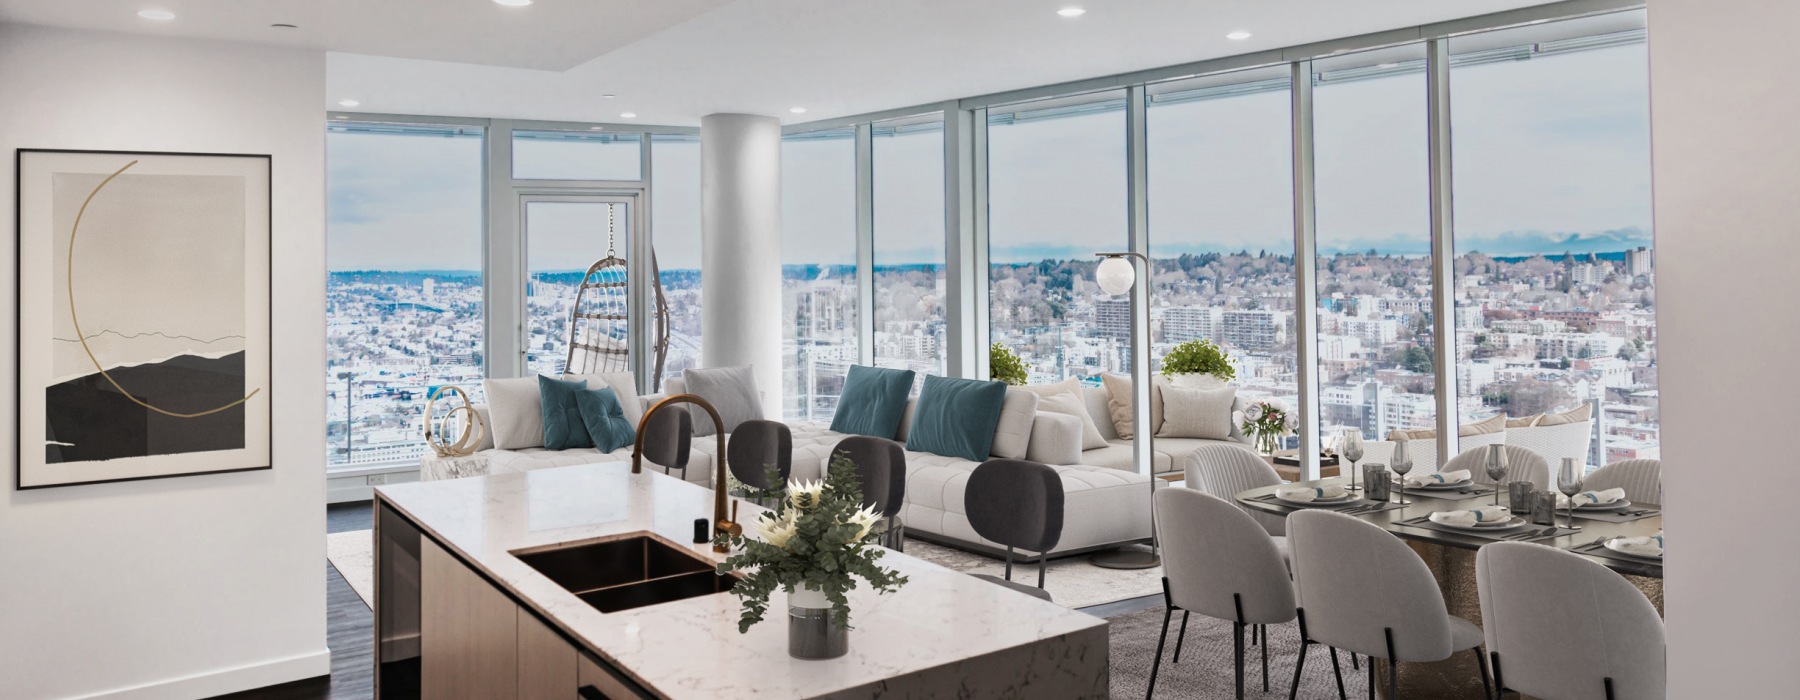 Penthouse 4004 kitchen island with quartz countertops, dining area and floor to ceiling windows with private wraparound terrace and views of South Lake Union.